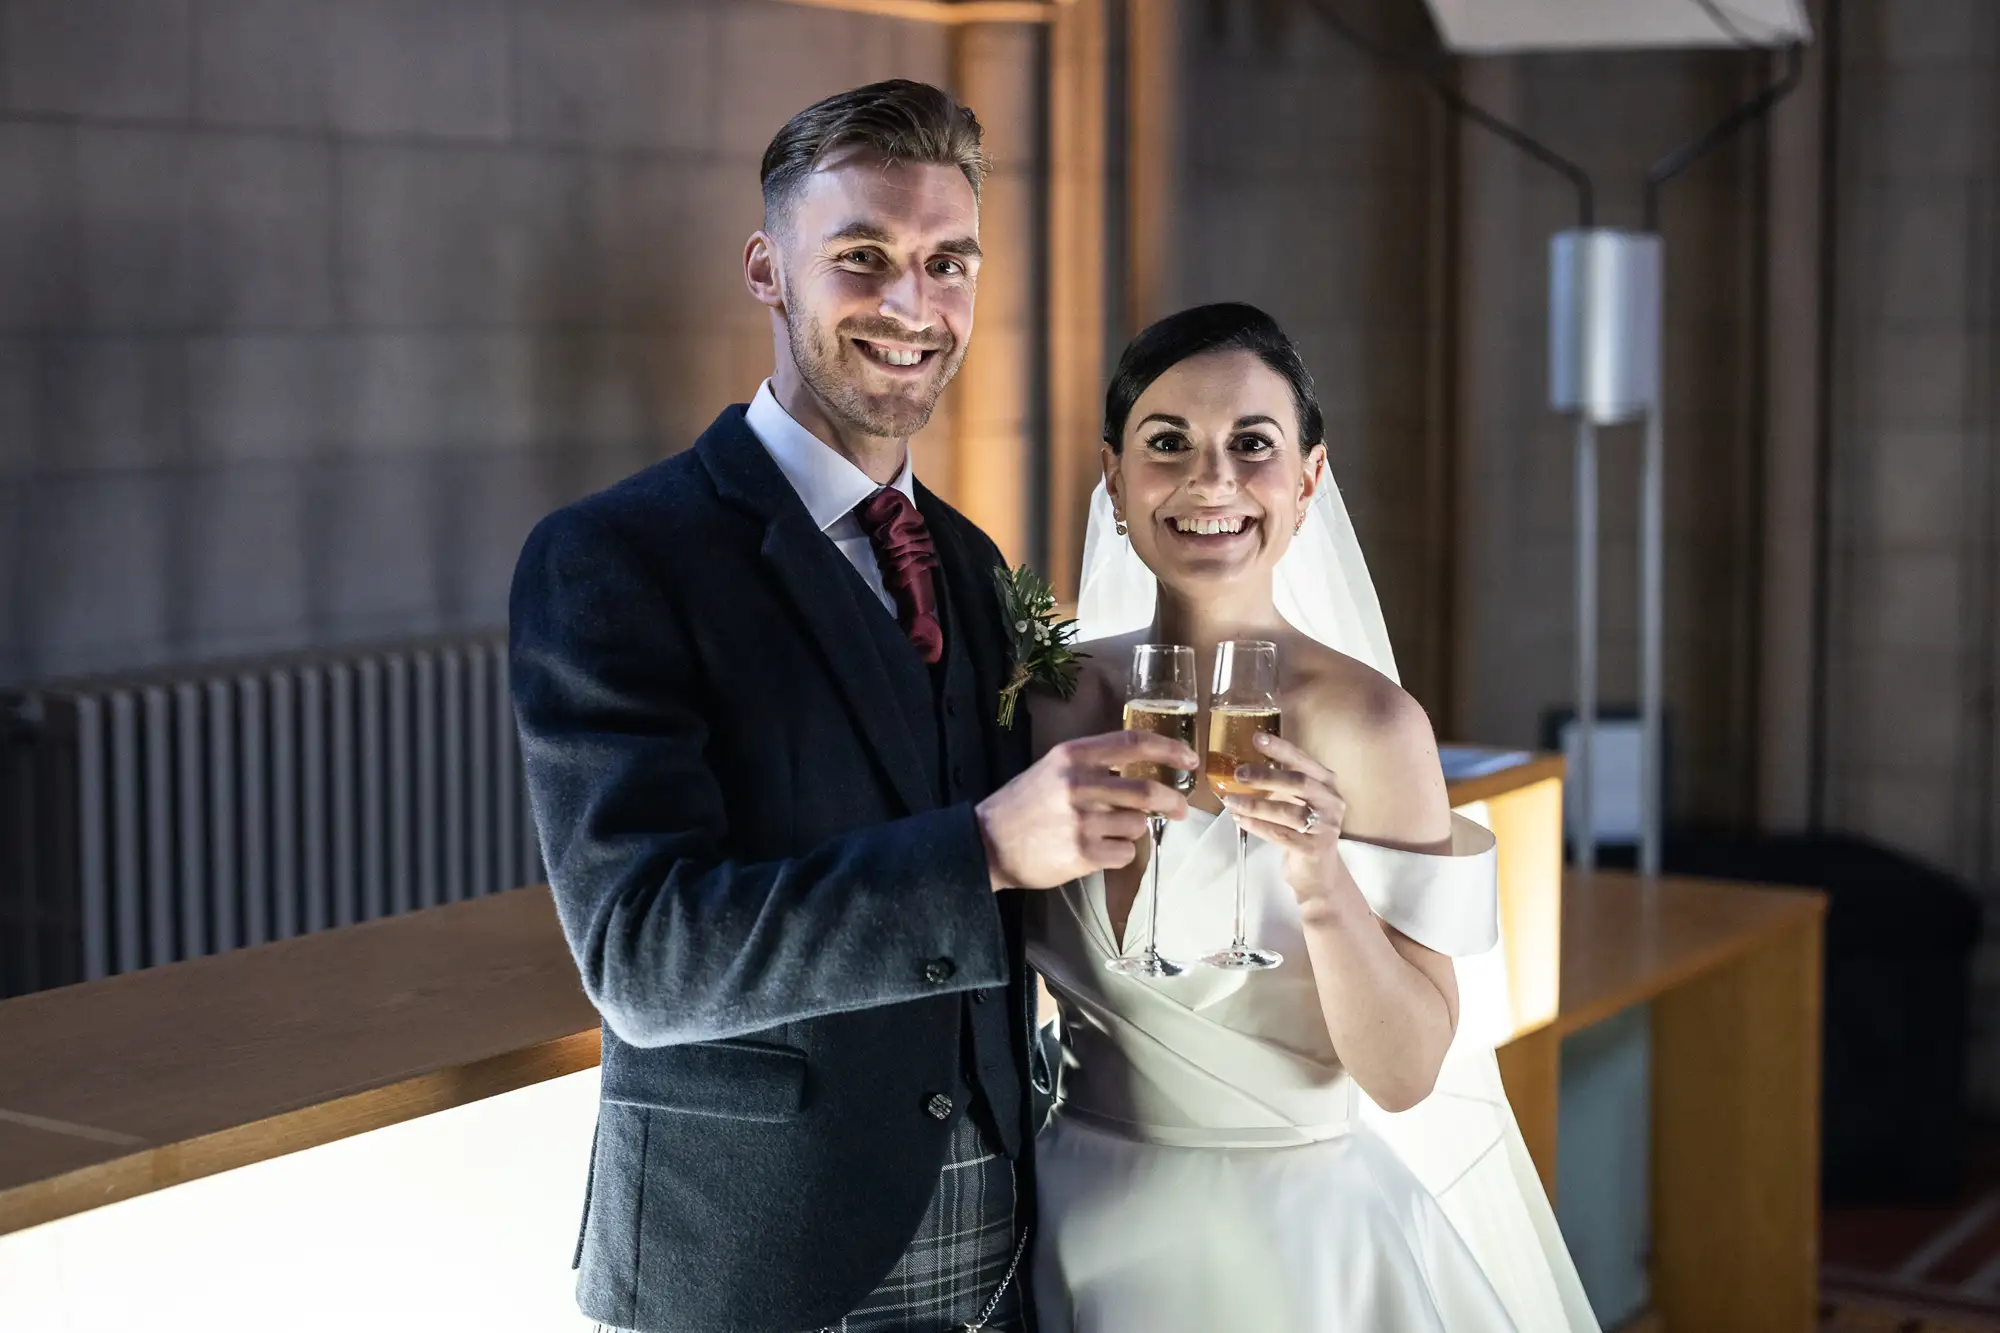 A bride and groom smiling and toasting with champagne glasses at their wedding reception.